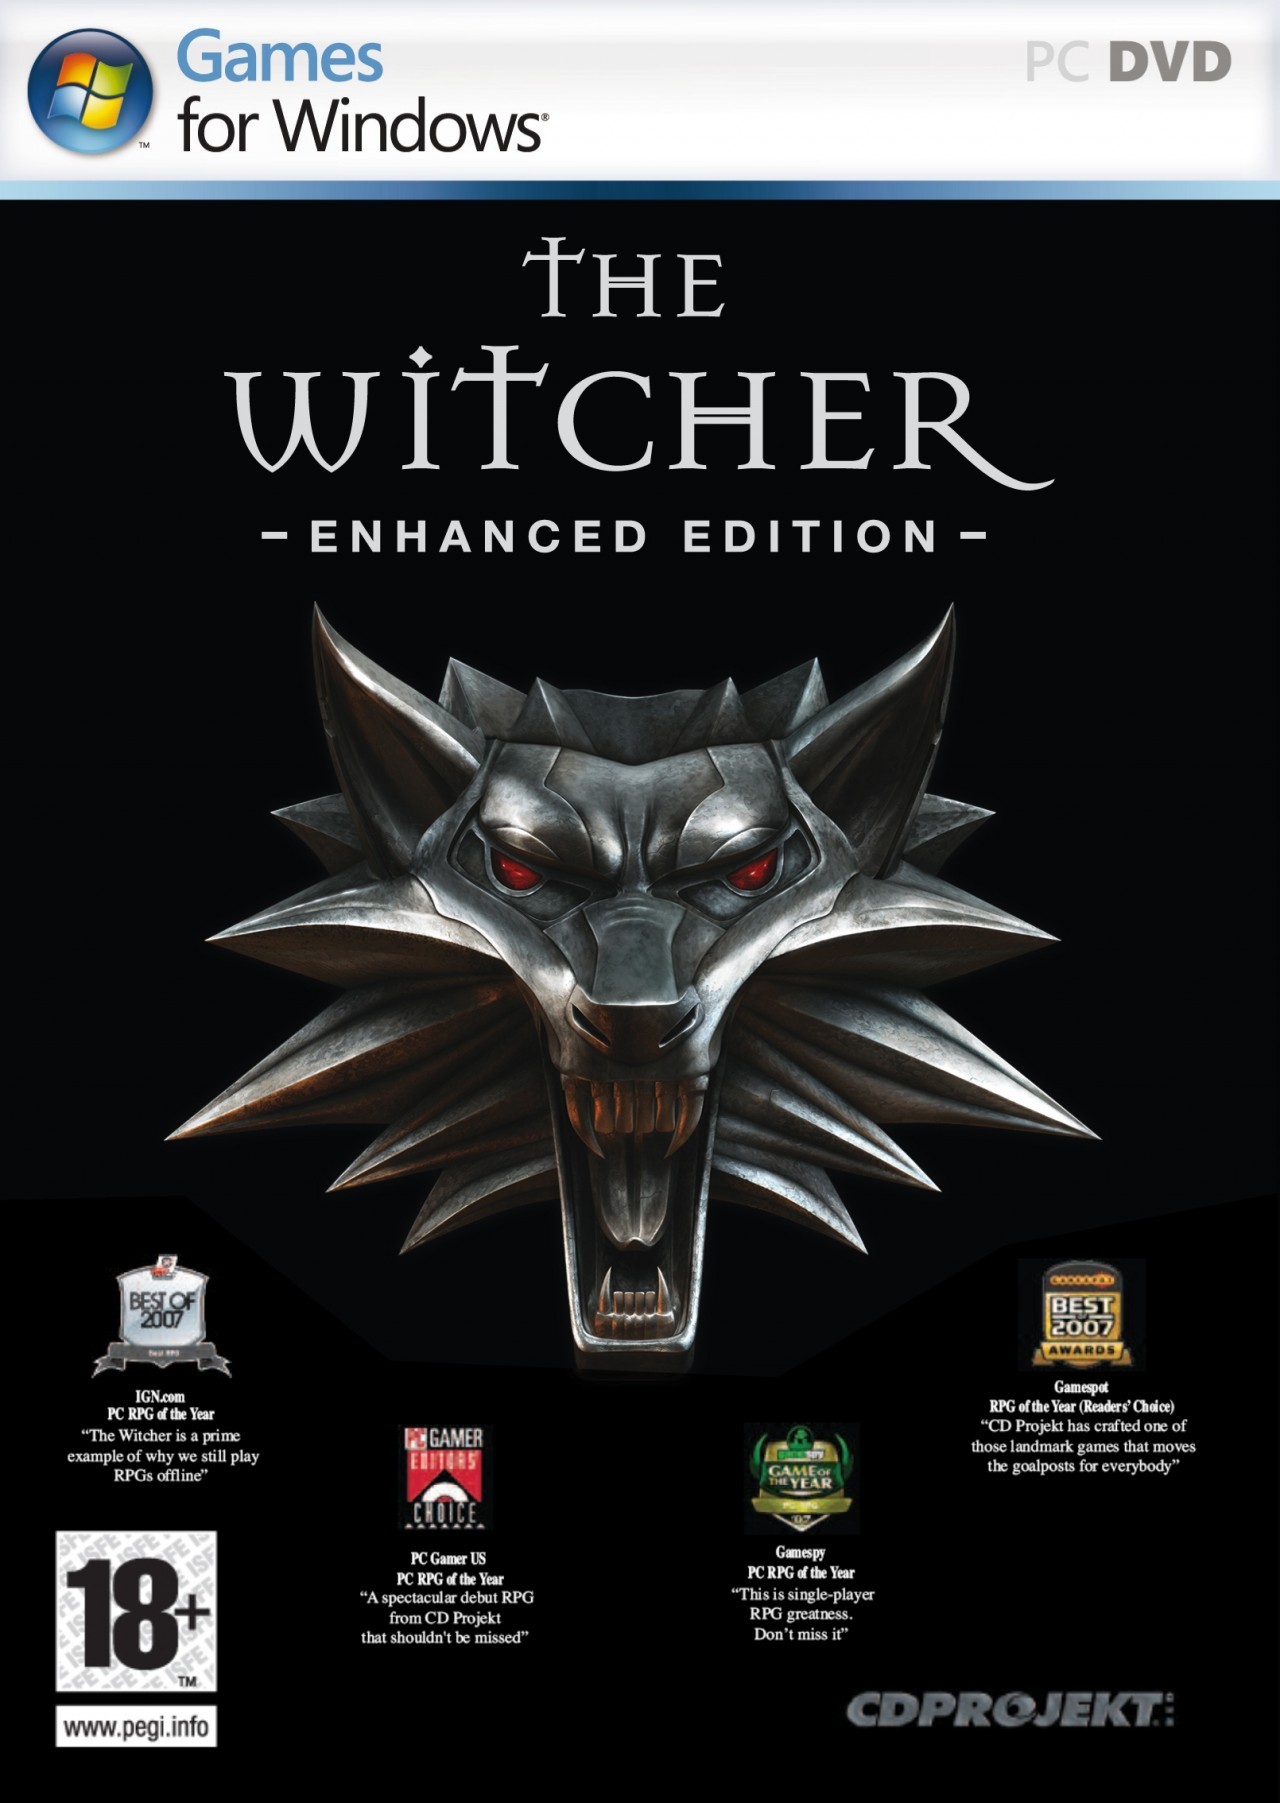 The Witcher 2 Enhanced Edition Save Games Pc